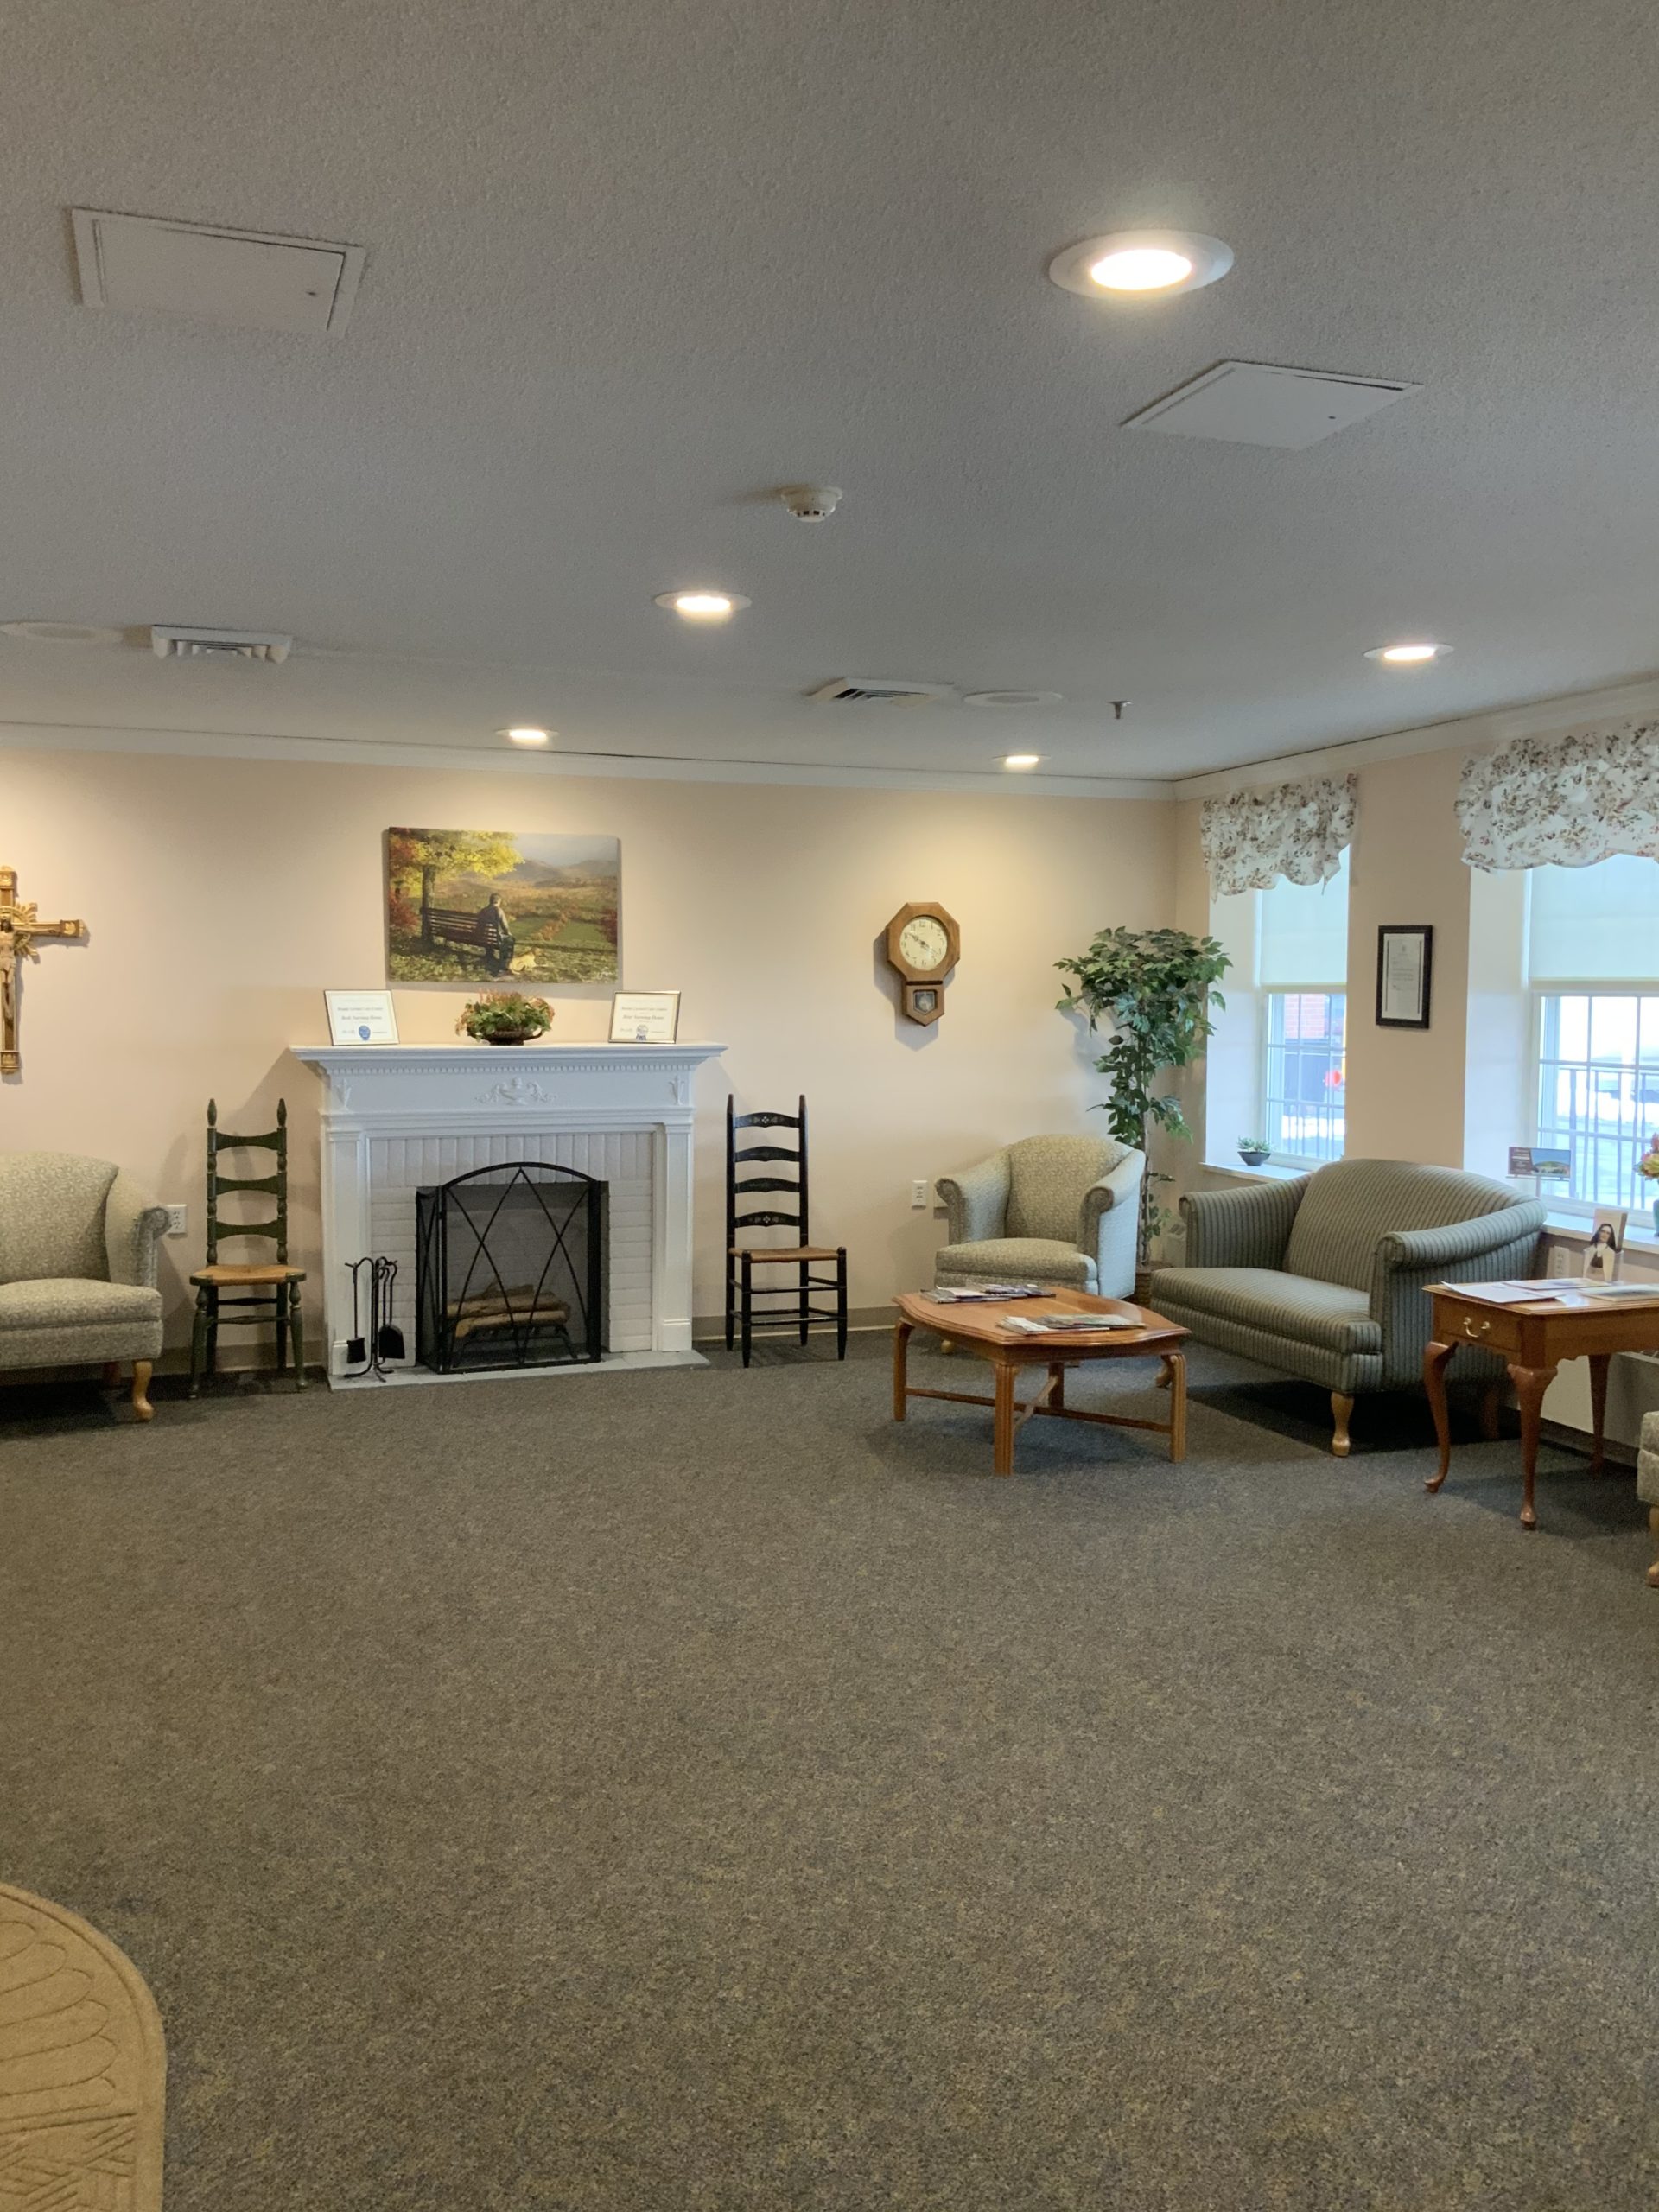 It is here at Mount Carmel Care Center where our belief is that each home should provide a welcoming, person-centered environment and atmosphere of a “Home”.